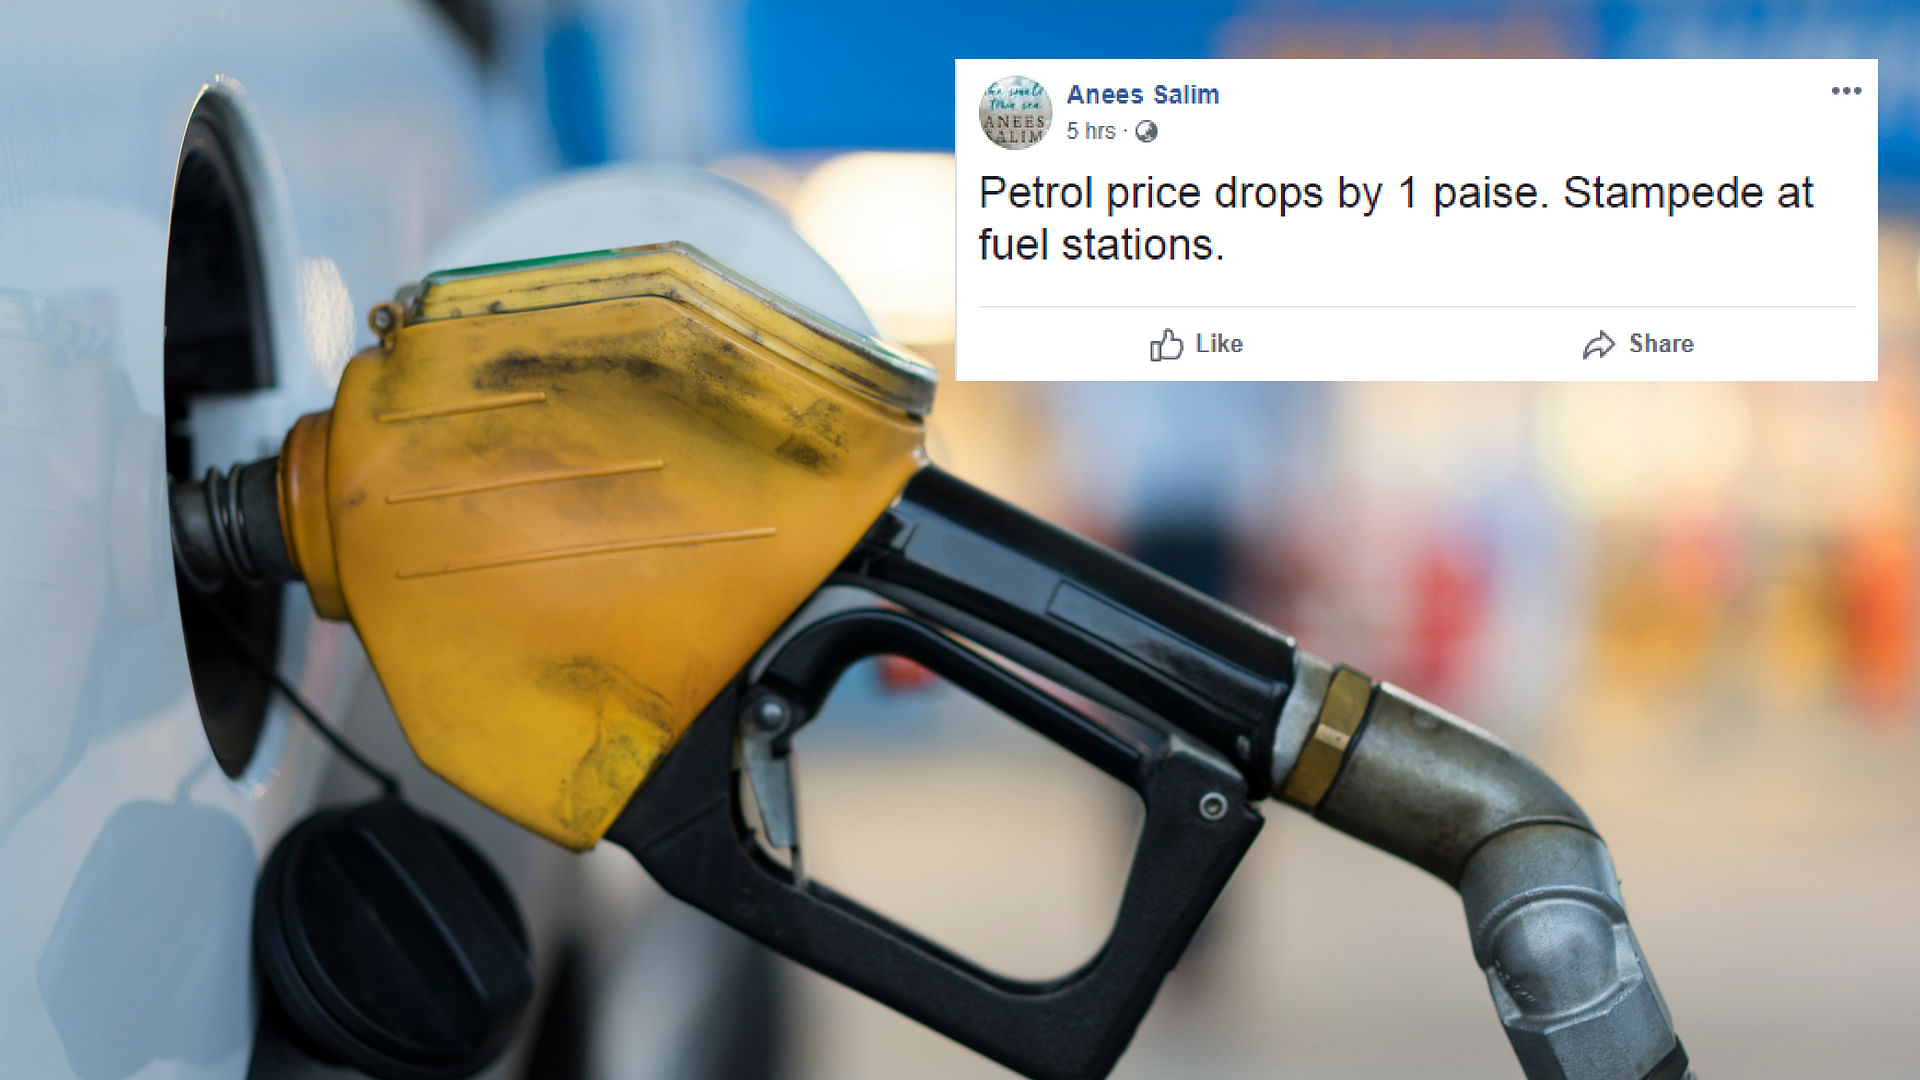 Petrol prices were cut by 1 paisa per litre in the four metros, after 16 continuous days of price hikes.